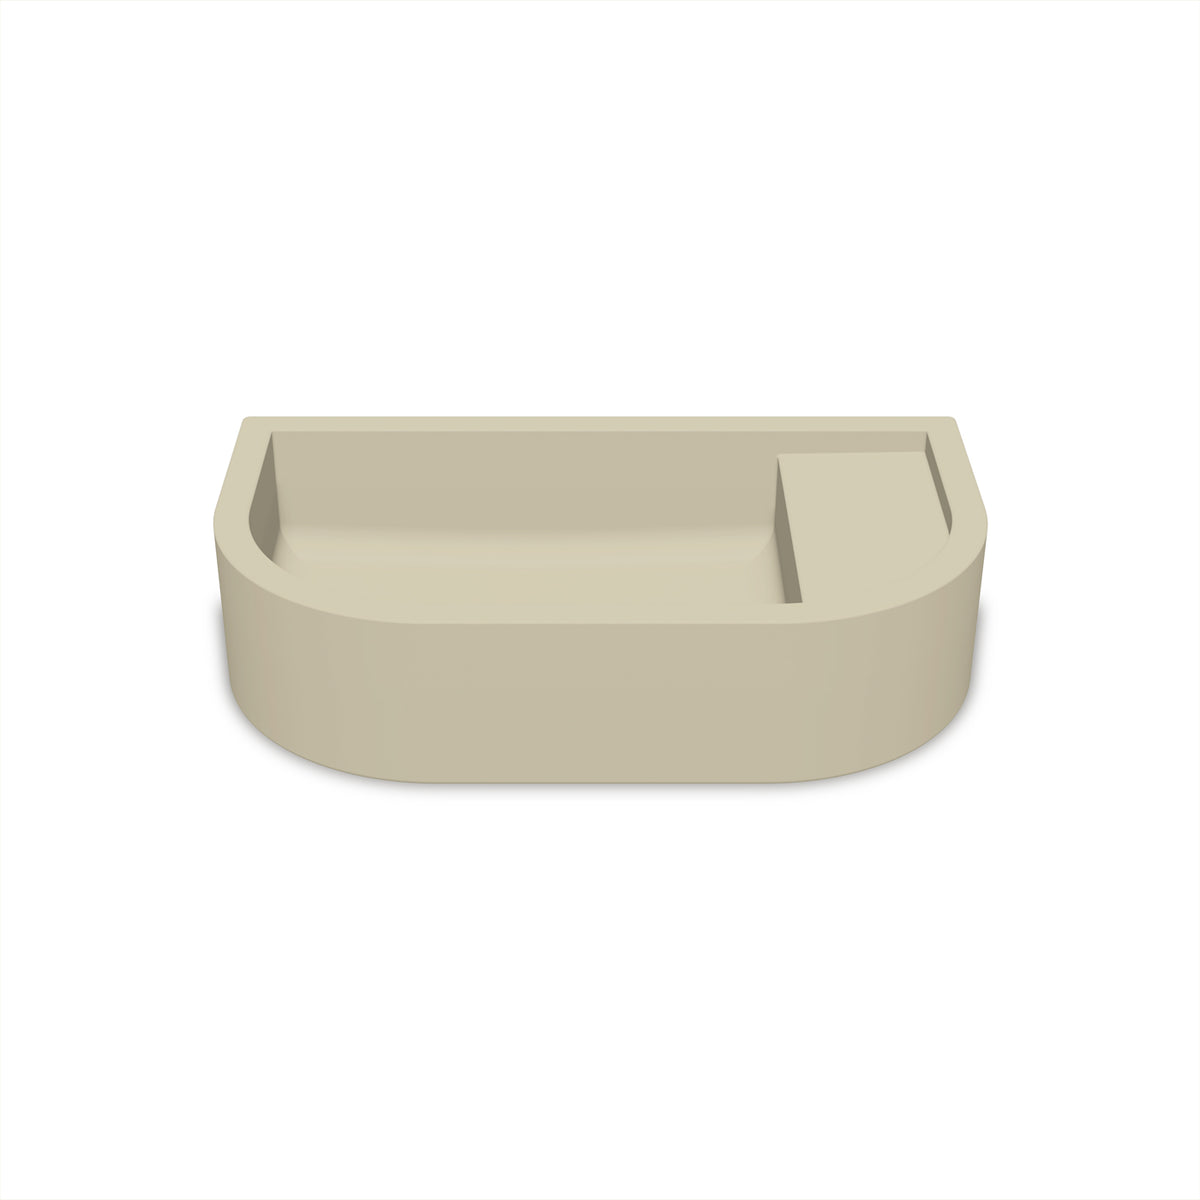 Loop 02 Basin - Surface Mount (Sand,No Tap Hole)